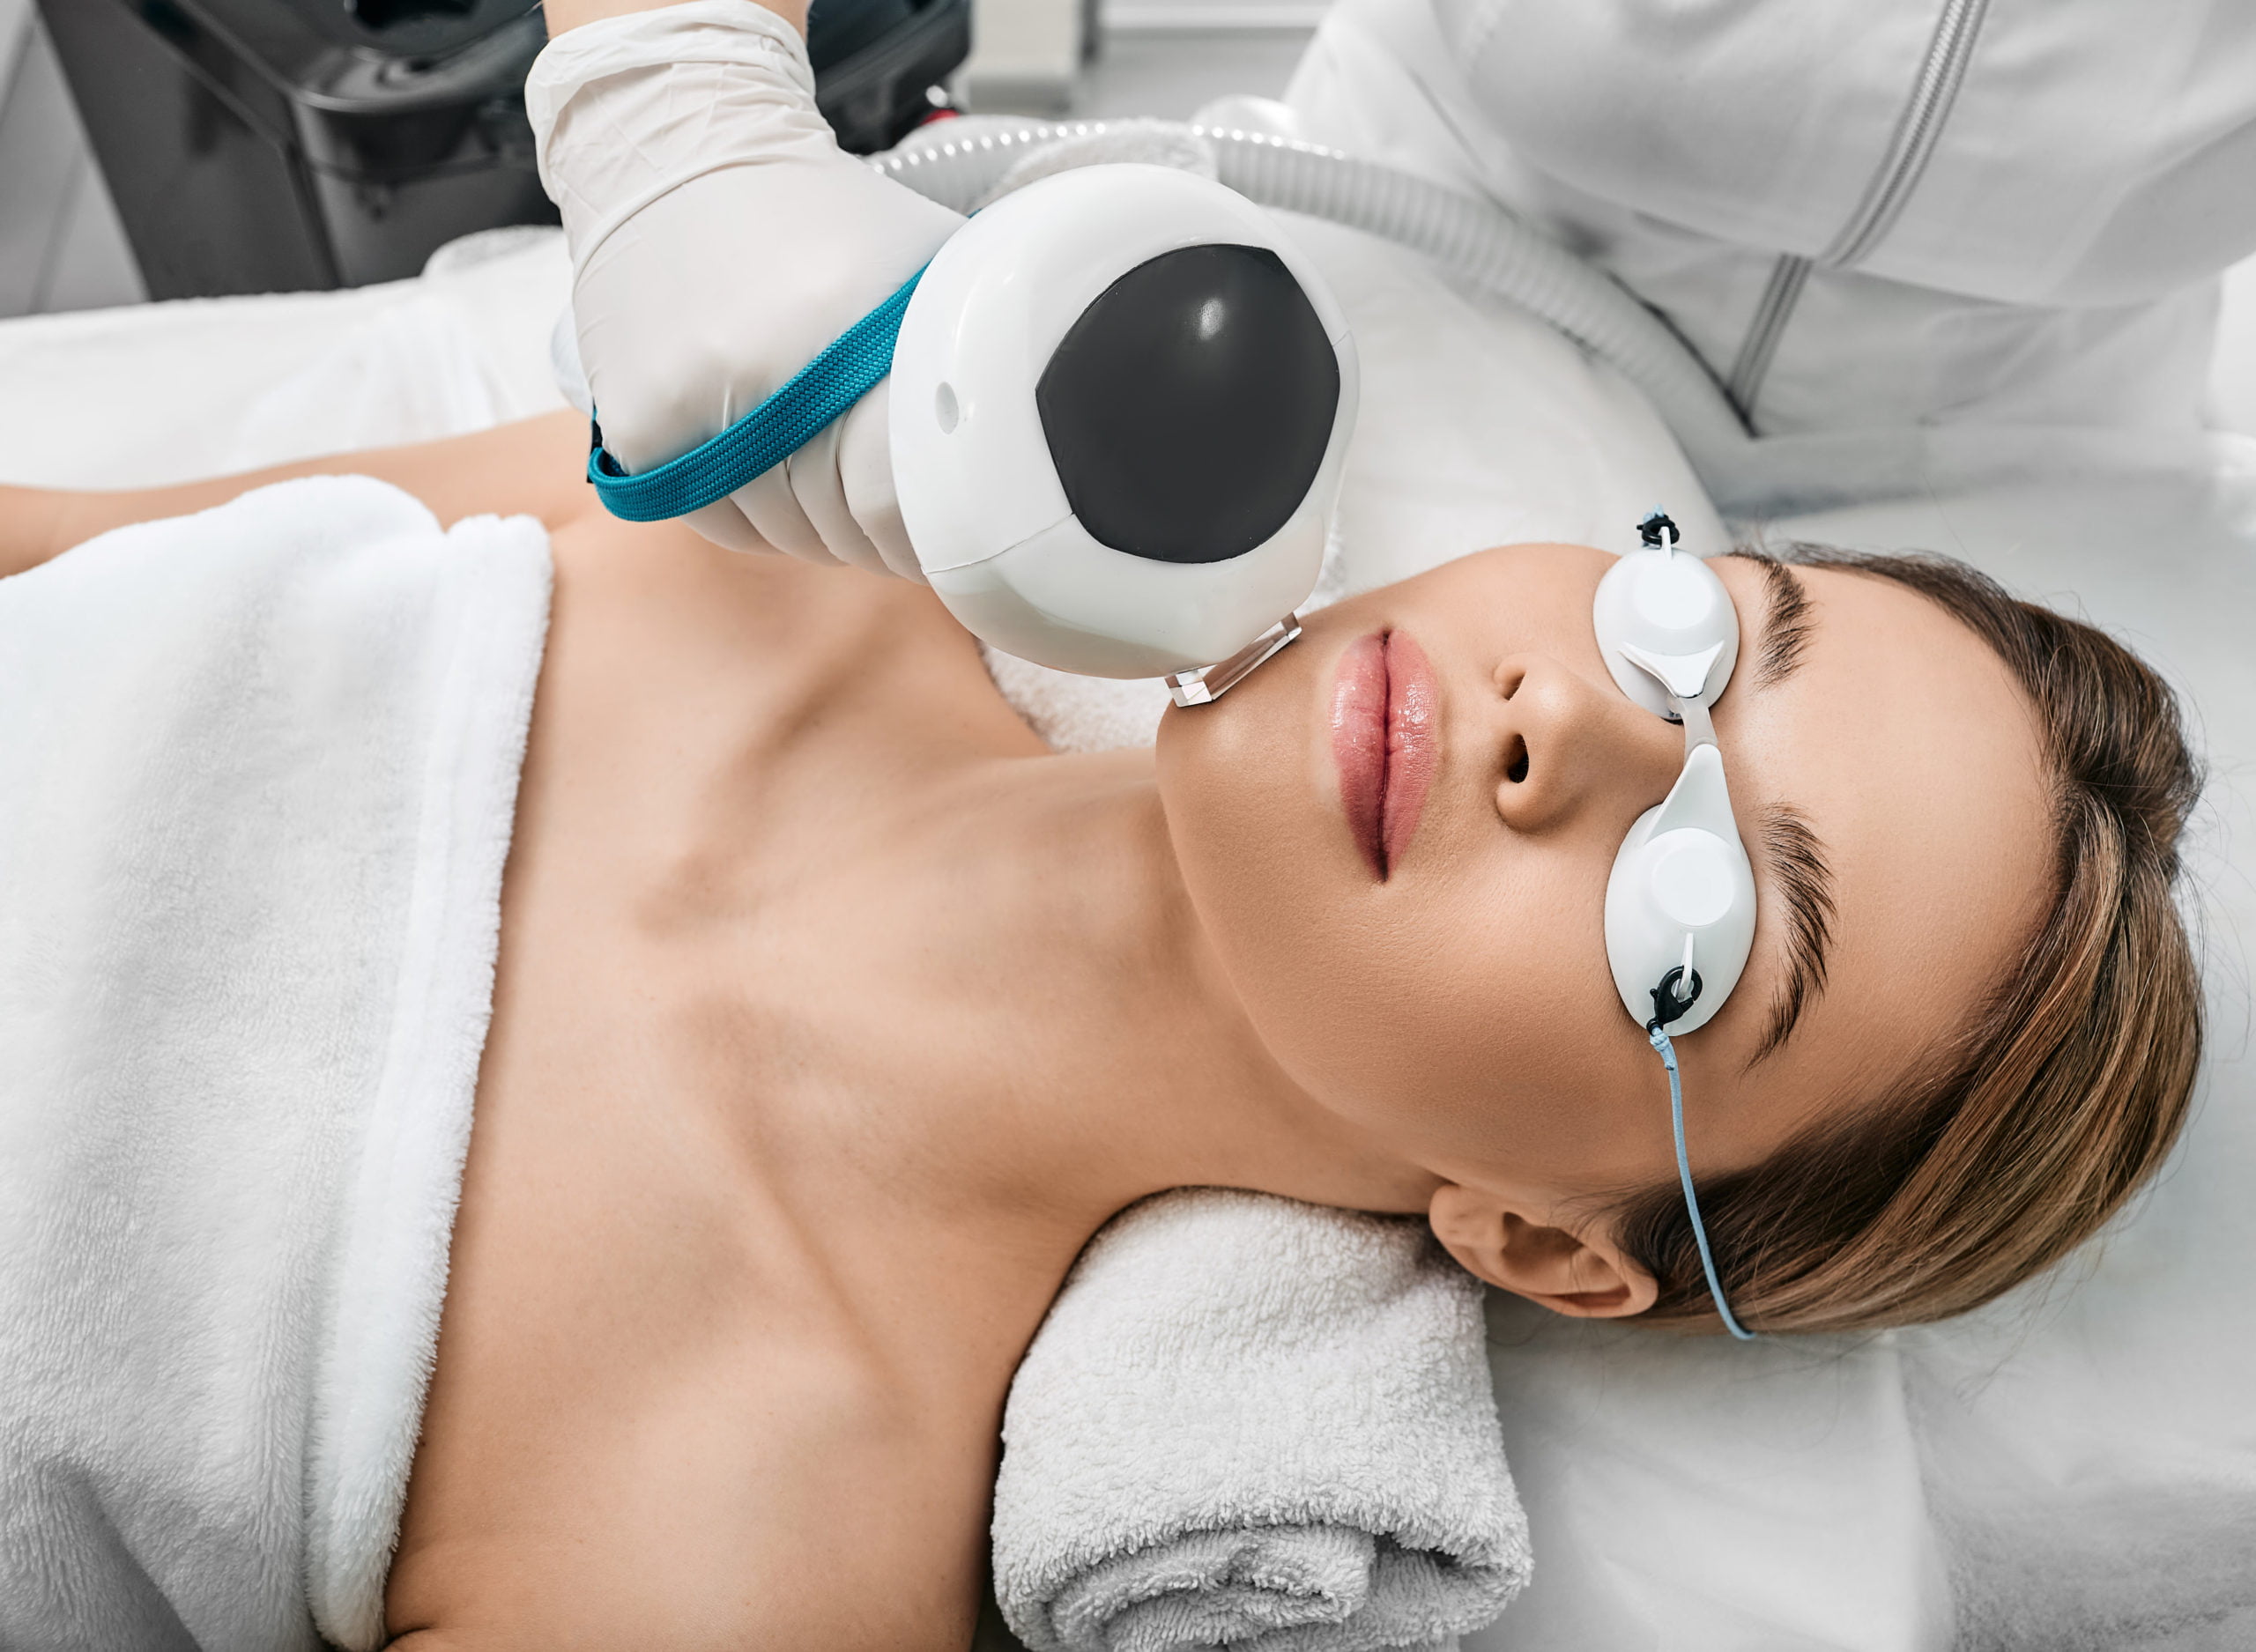 Intense Pulsed Light (IPL) Photofacial Rejuvenate Your Skin with Advanced Light Therapy